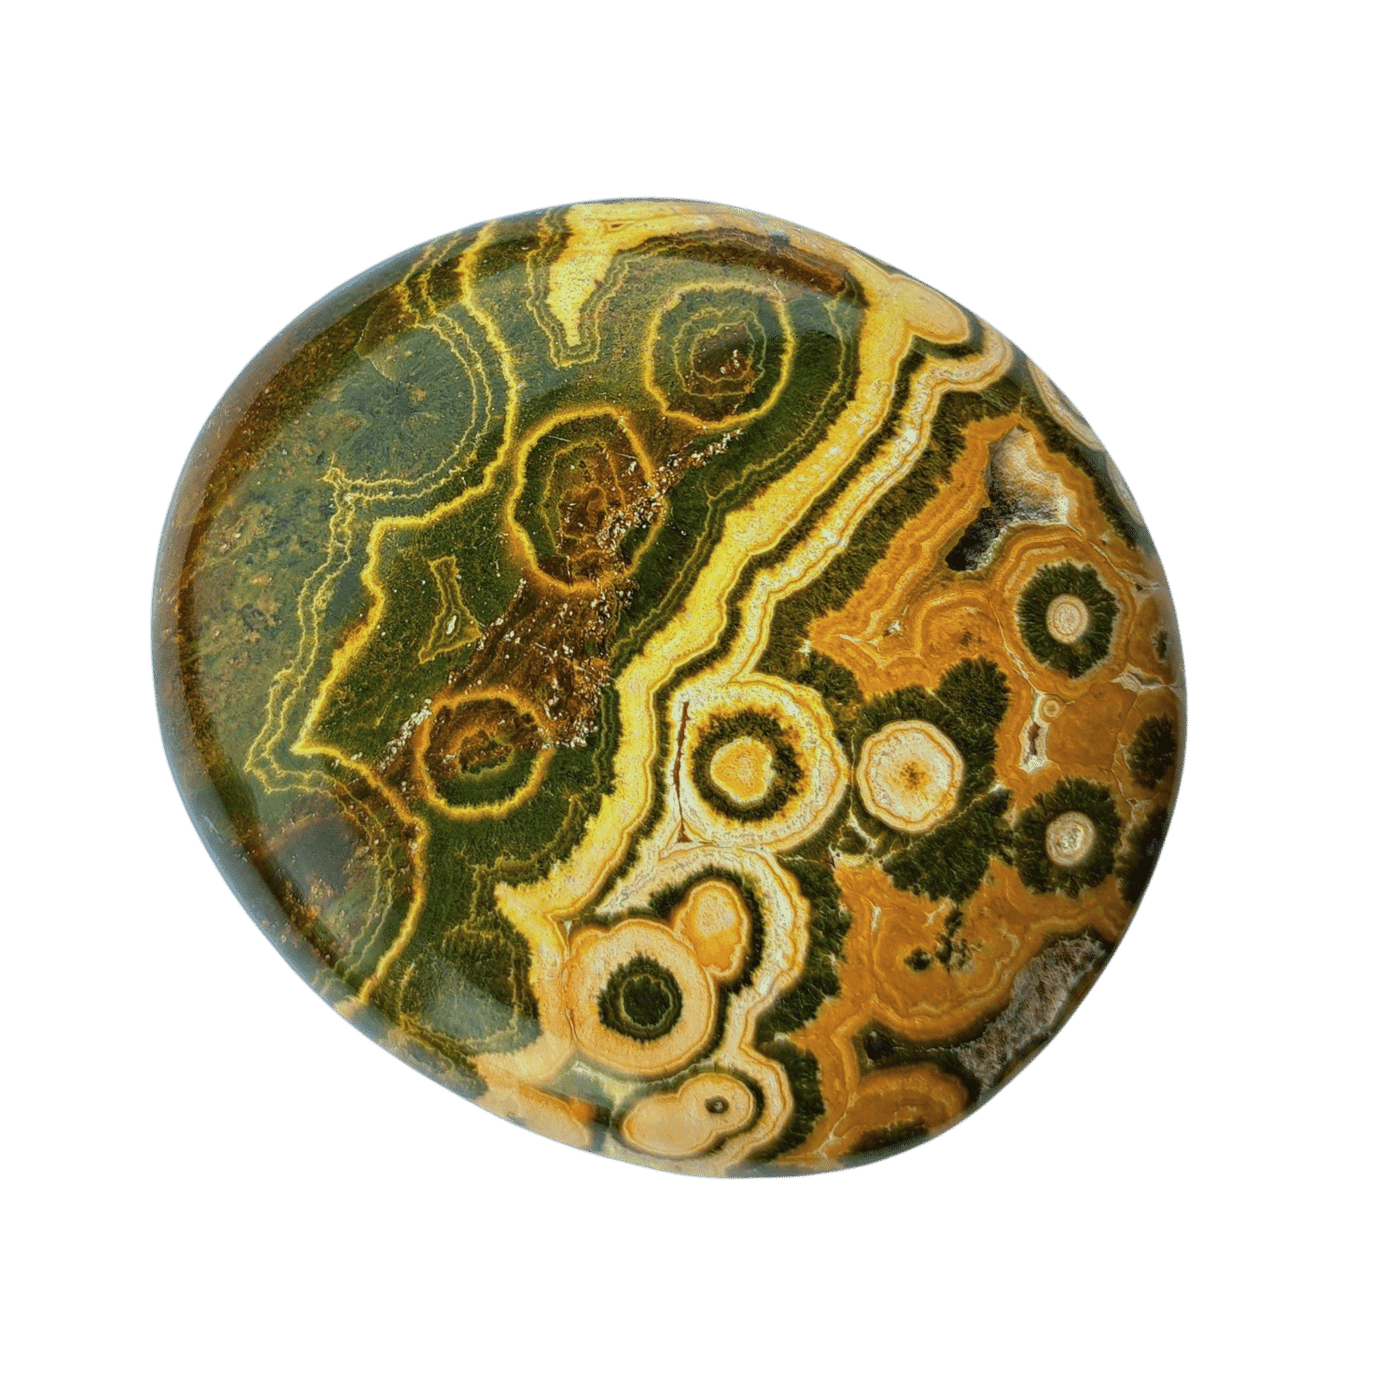 product view of Kambamby Ocean Jasper touchstone by Energy Muse